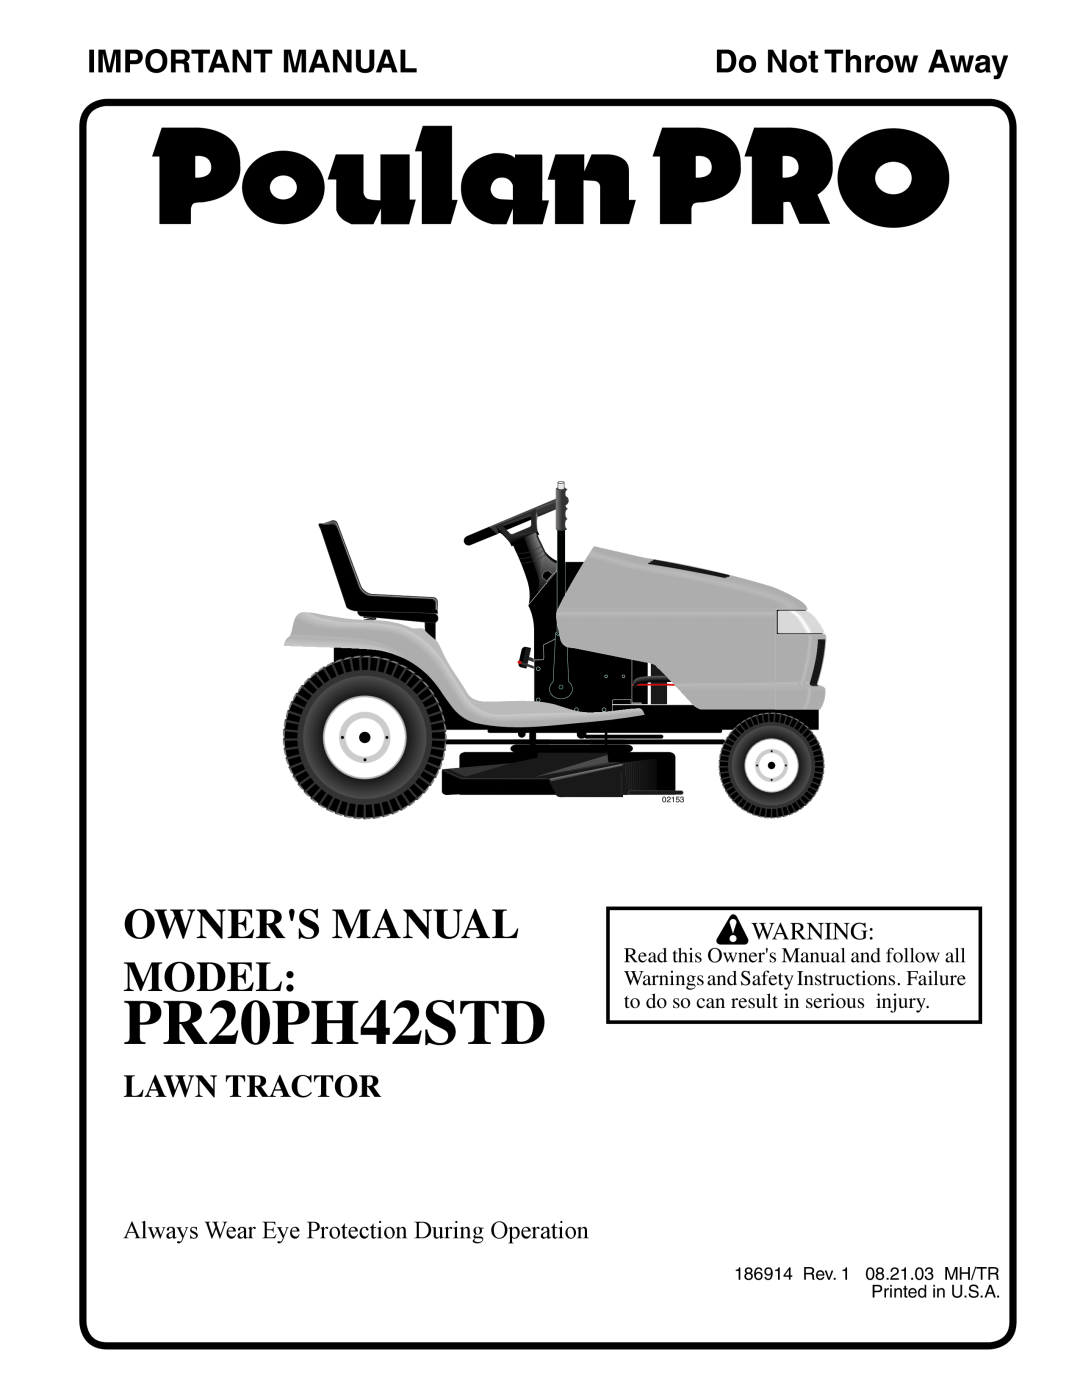 Poulan PR20PH42STD owner manual Owners Manual Model, Important Manual, Do Not Throw Away, Lawn Tractor, 02153 